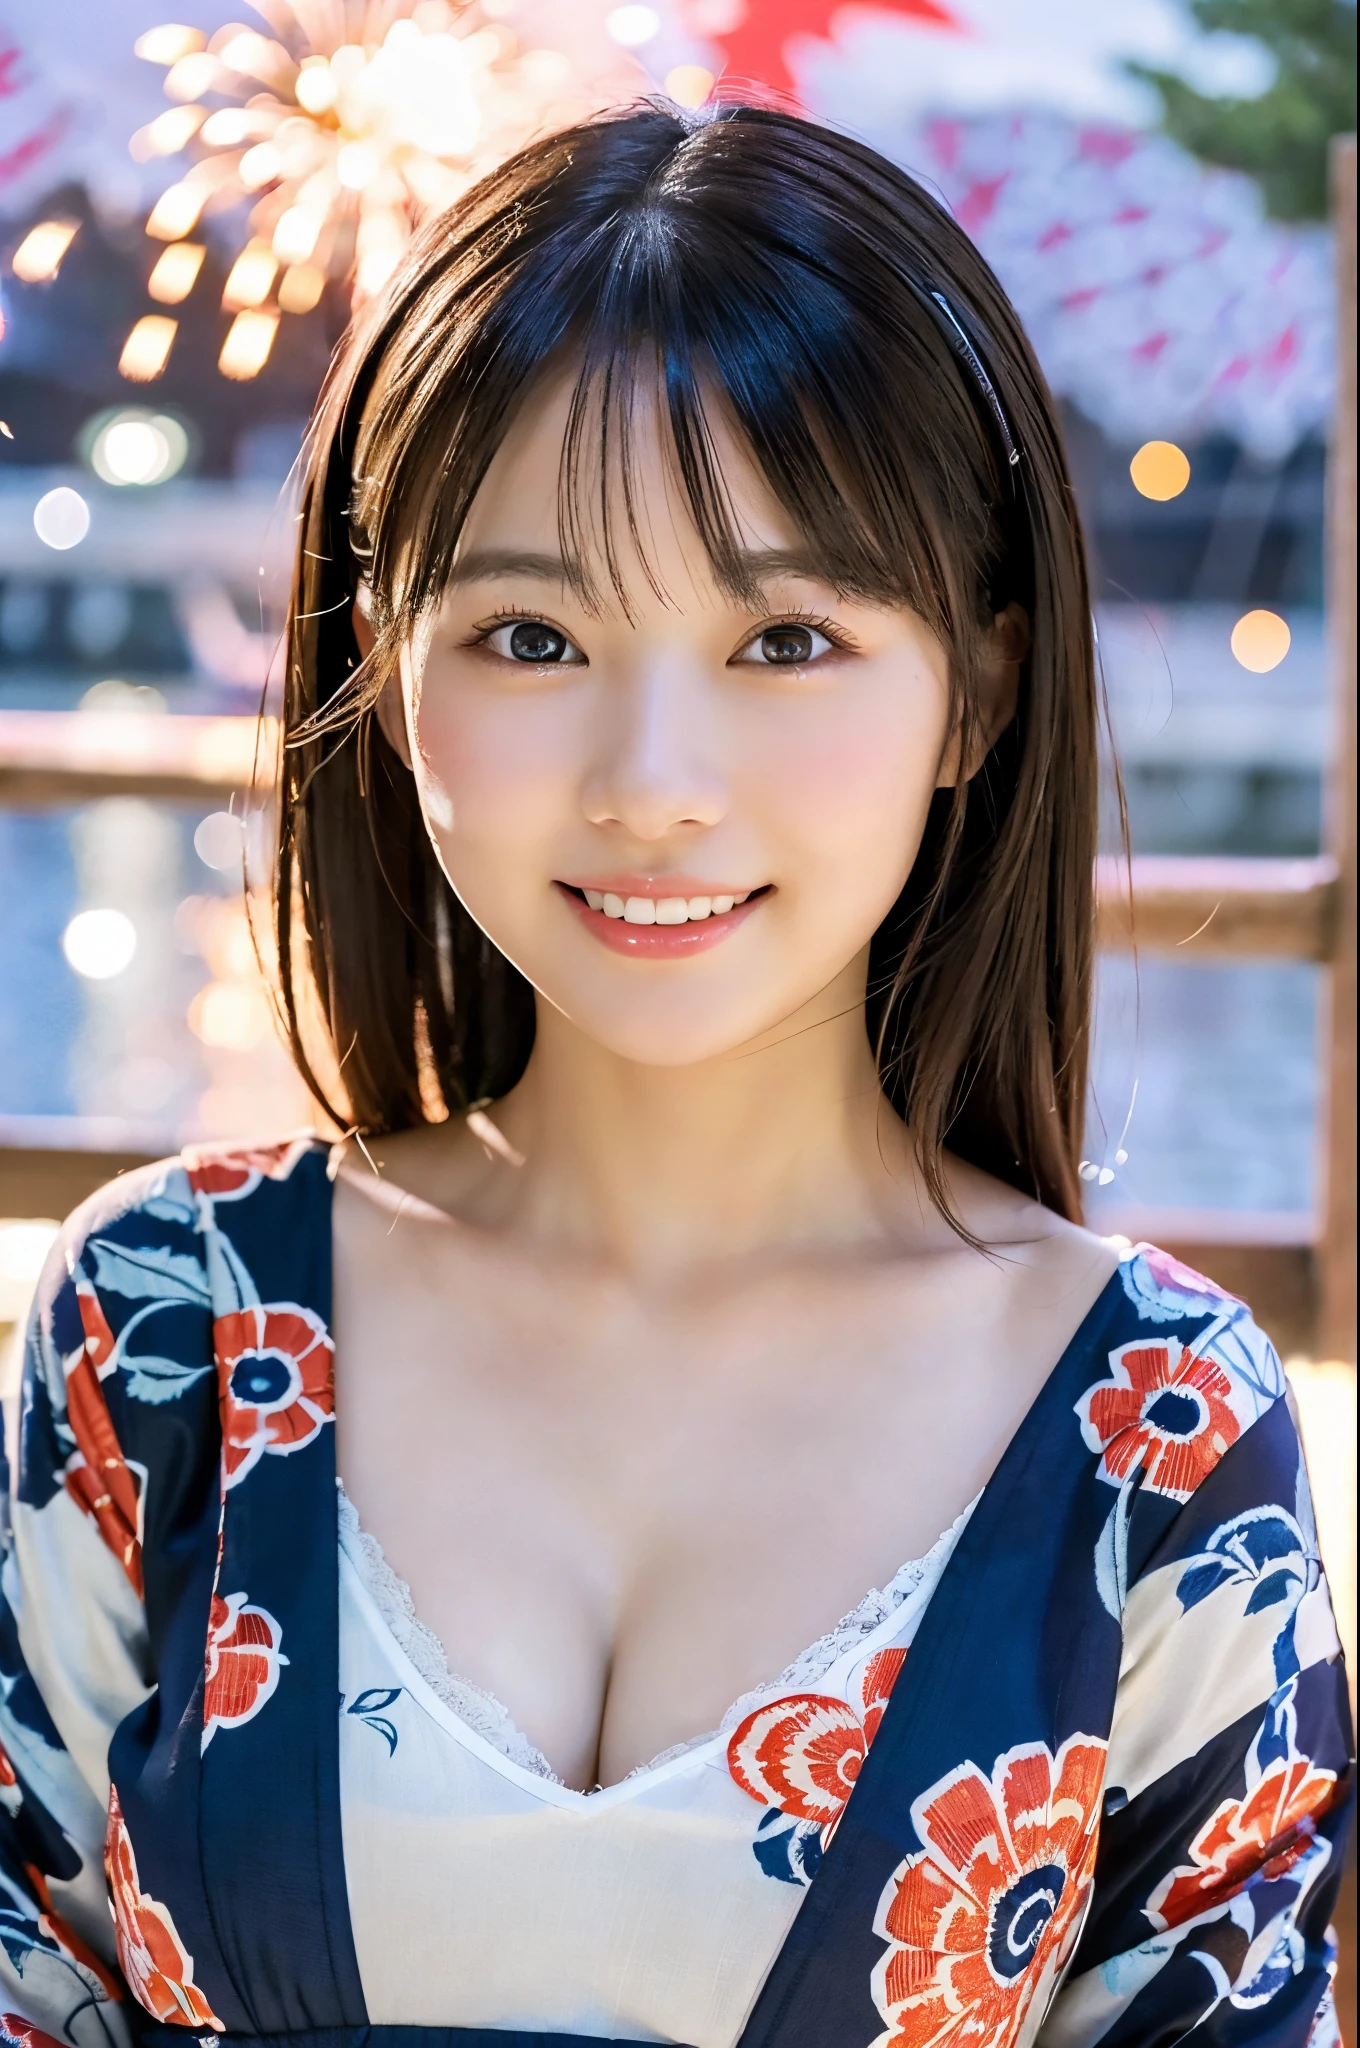 ulzzang -6500-v1.1, (Raw photo:1.2), (Photorealsitic), a beautiful detailed girl, (Real: 1.4), extremely detailed eye and face, ((Yukata with red floral pattern;1.3))、((Fireworks in the background:1.2)), selfee, Instagram、game_nffsw, huge filesize, hight resolution, ighly detailed, top-quality, [​masterpiece:1.6], illustratio, ighly detailed, nffsw, finely detail, top-quality, 8k wallpaper, Cinematographic lighting, 1girl in, 17 age, perfect body type, cute droopy eyes beautiful big eyes、Pieckfinger, ((masutepiece)), Best Quality, eye shadow,  Portrait, ((FULL BODYSHOT:1.4))、(Very affectionate smile:1.2)、realistic skin textures、shinny skin、